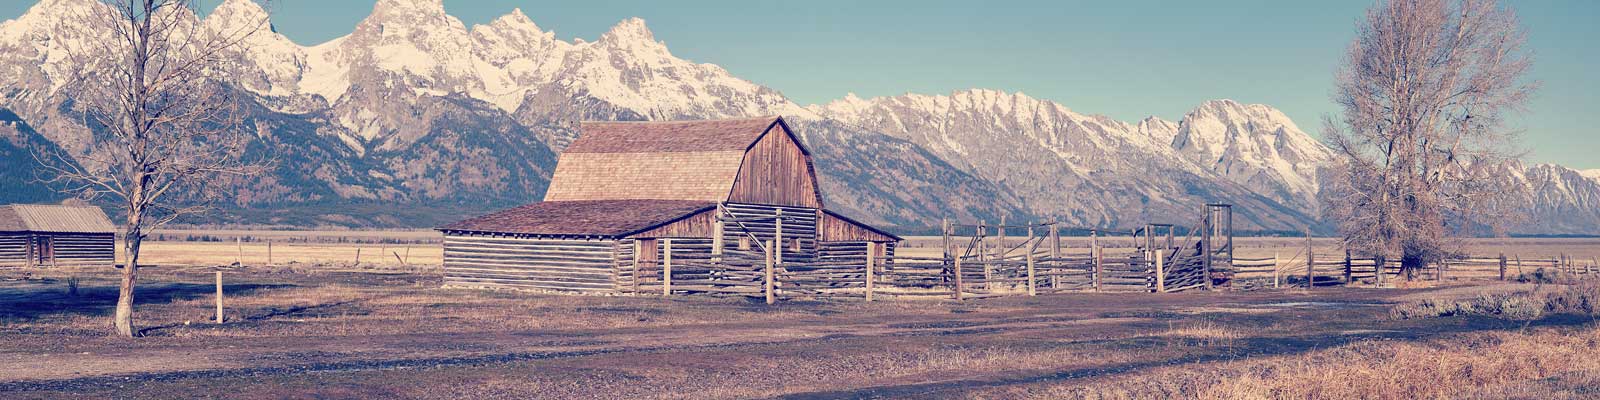 Pictured: A ranch and mountains in Wyoming.